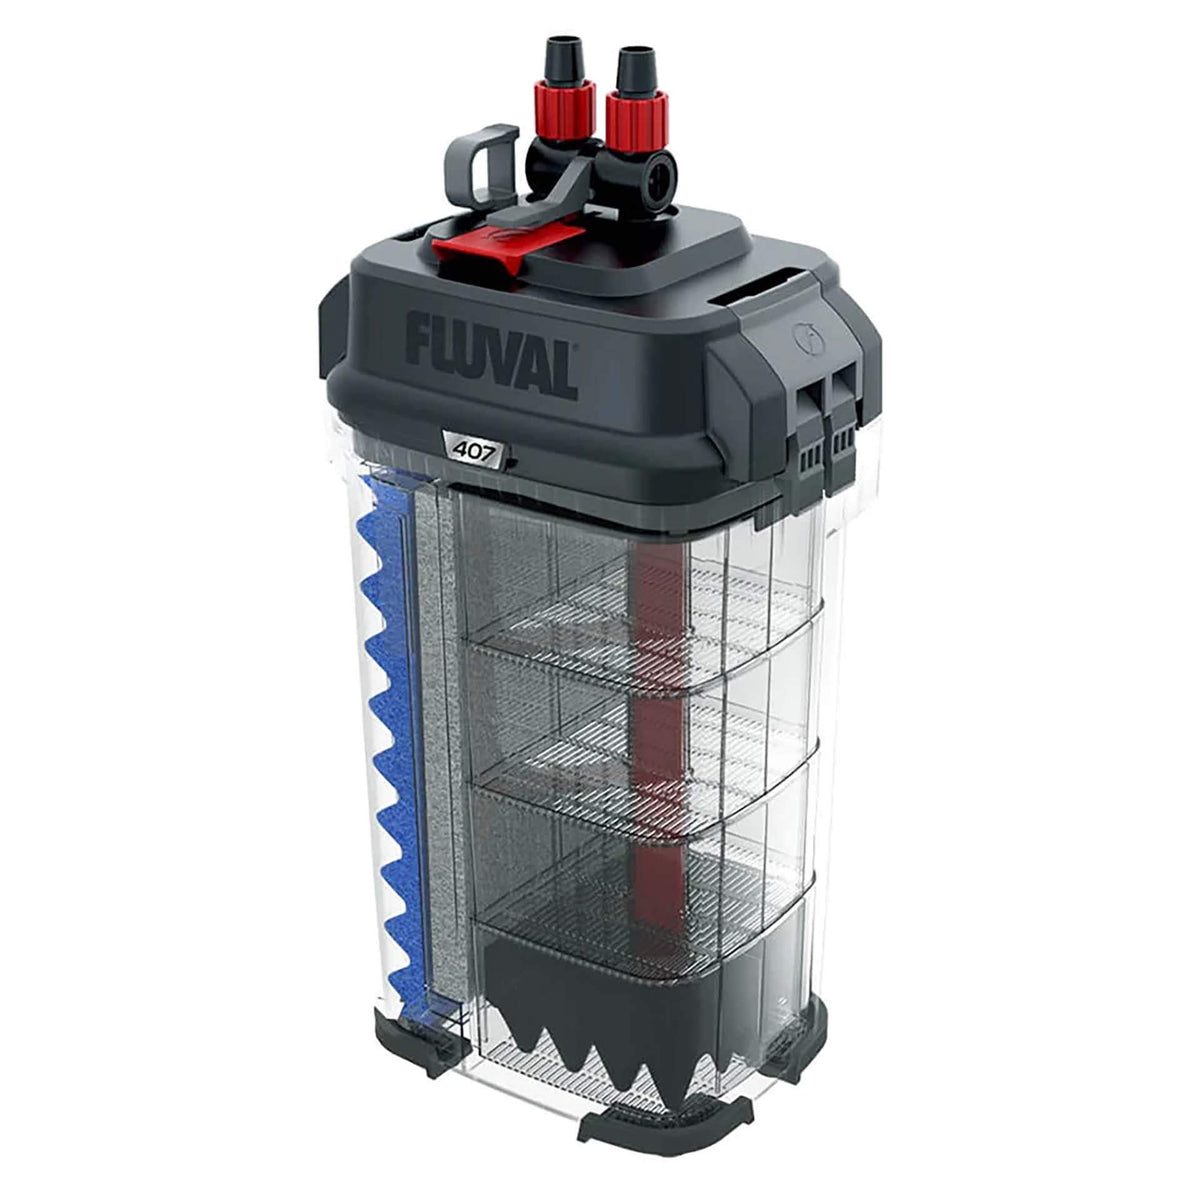 Fluval 407 Performance Canister Filter, up to 500 L Aquarium